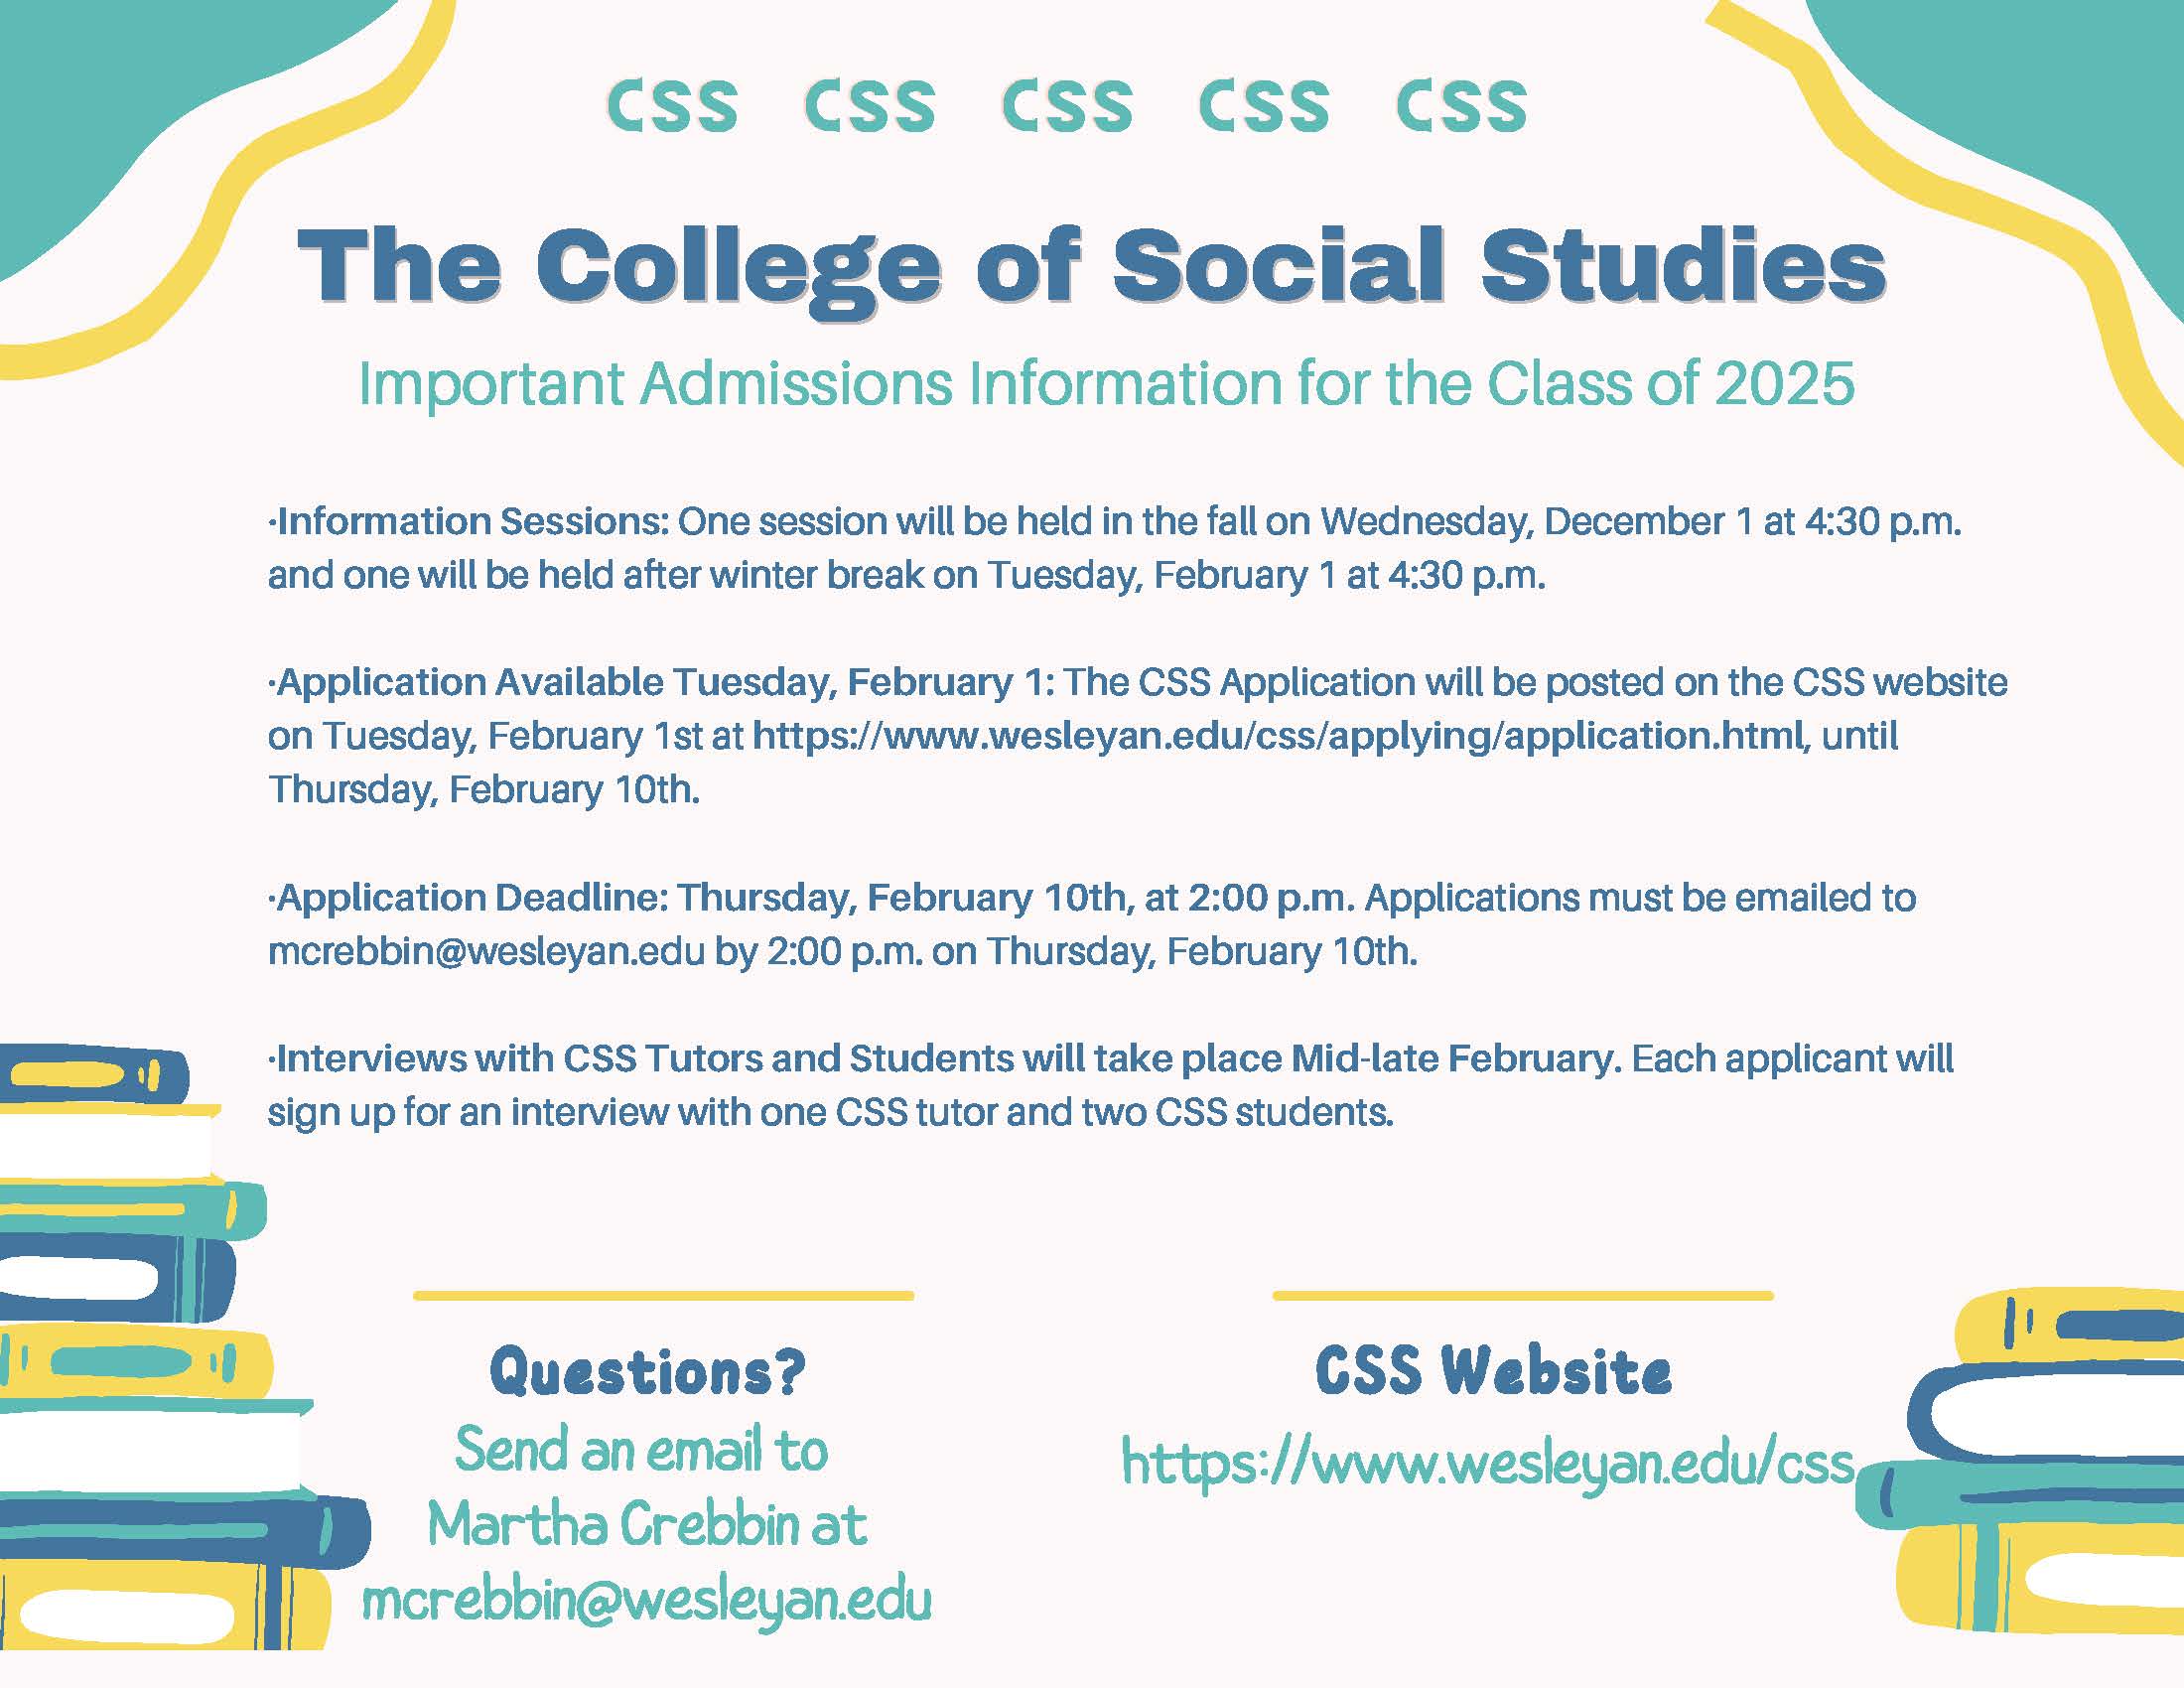 CSS Admissions Information for class of 2025